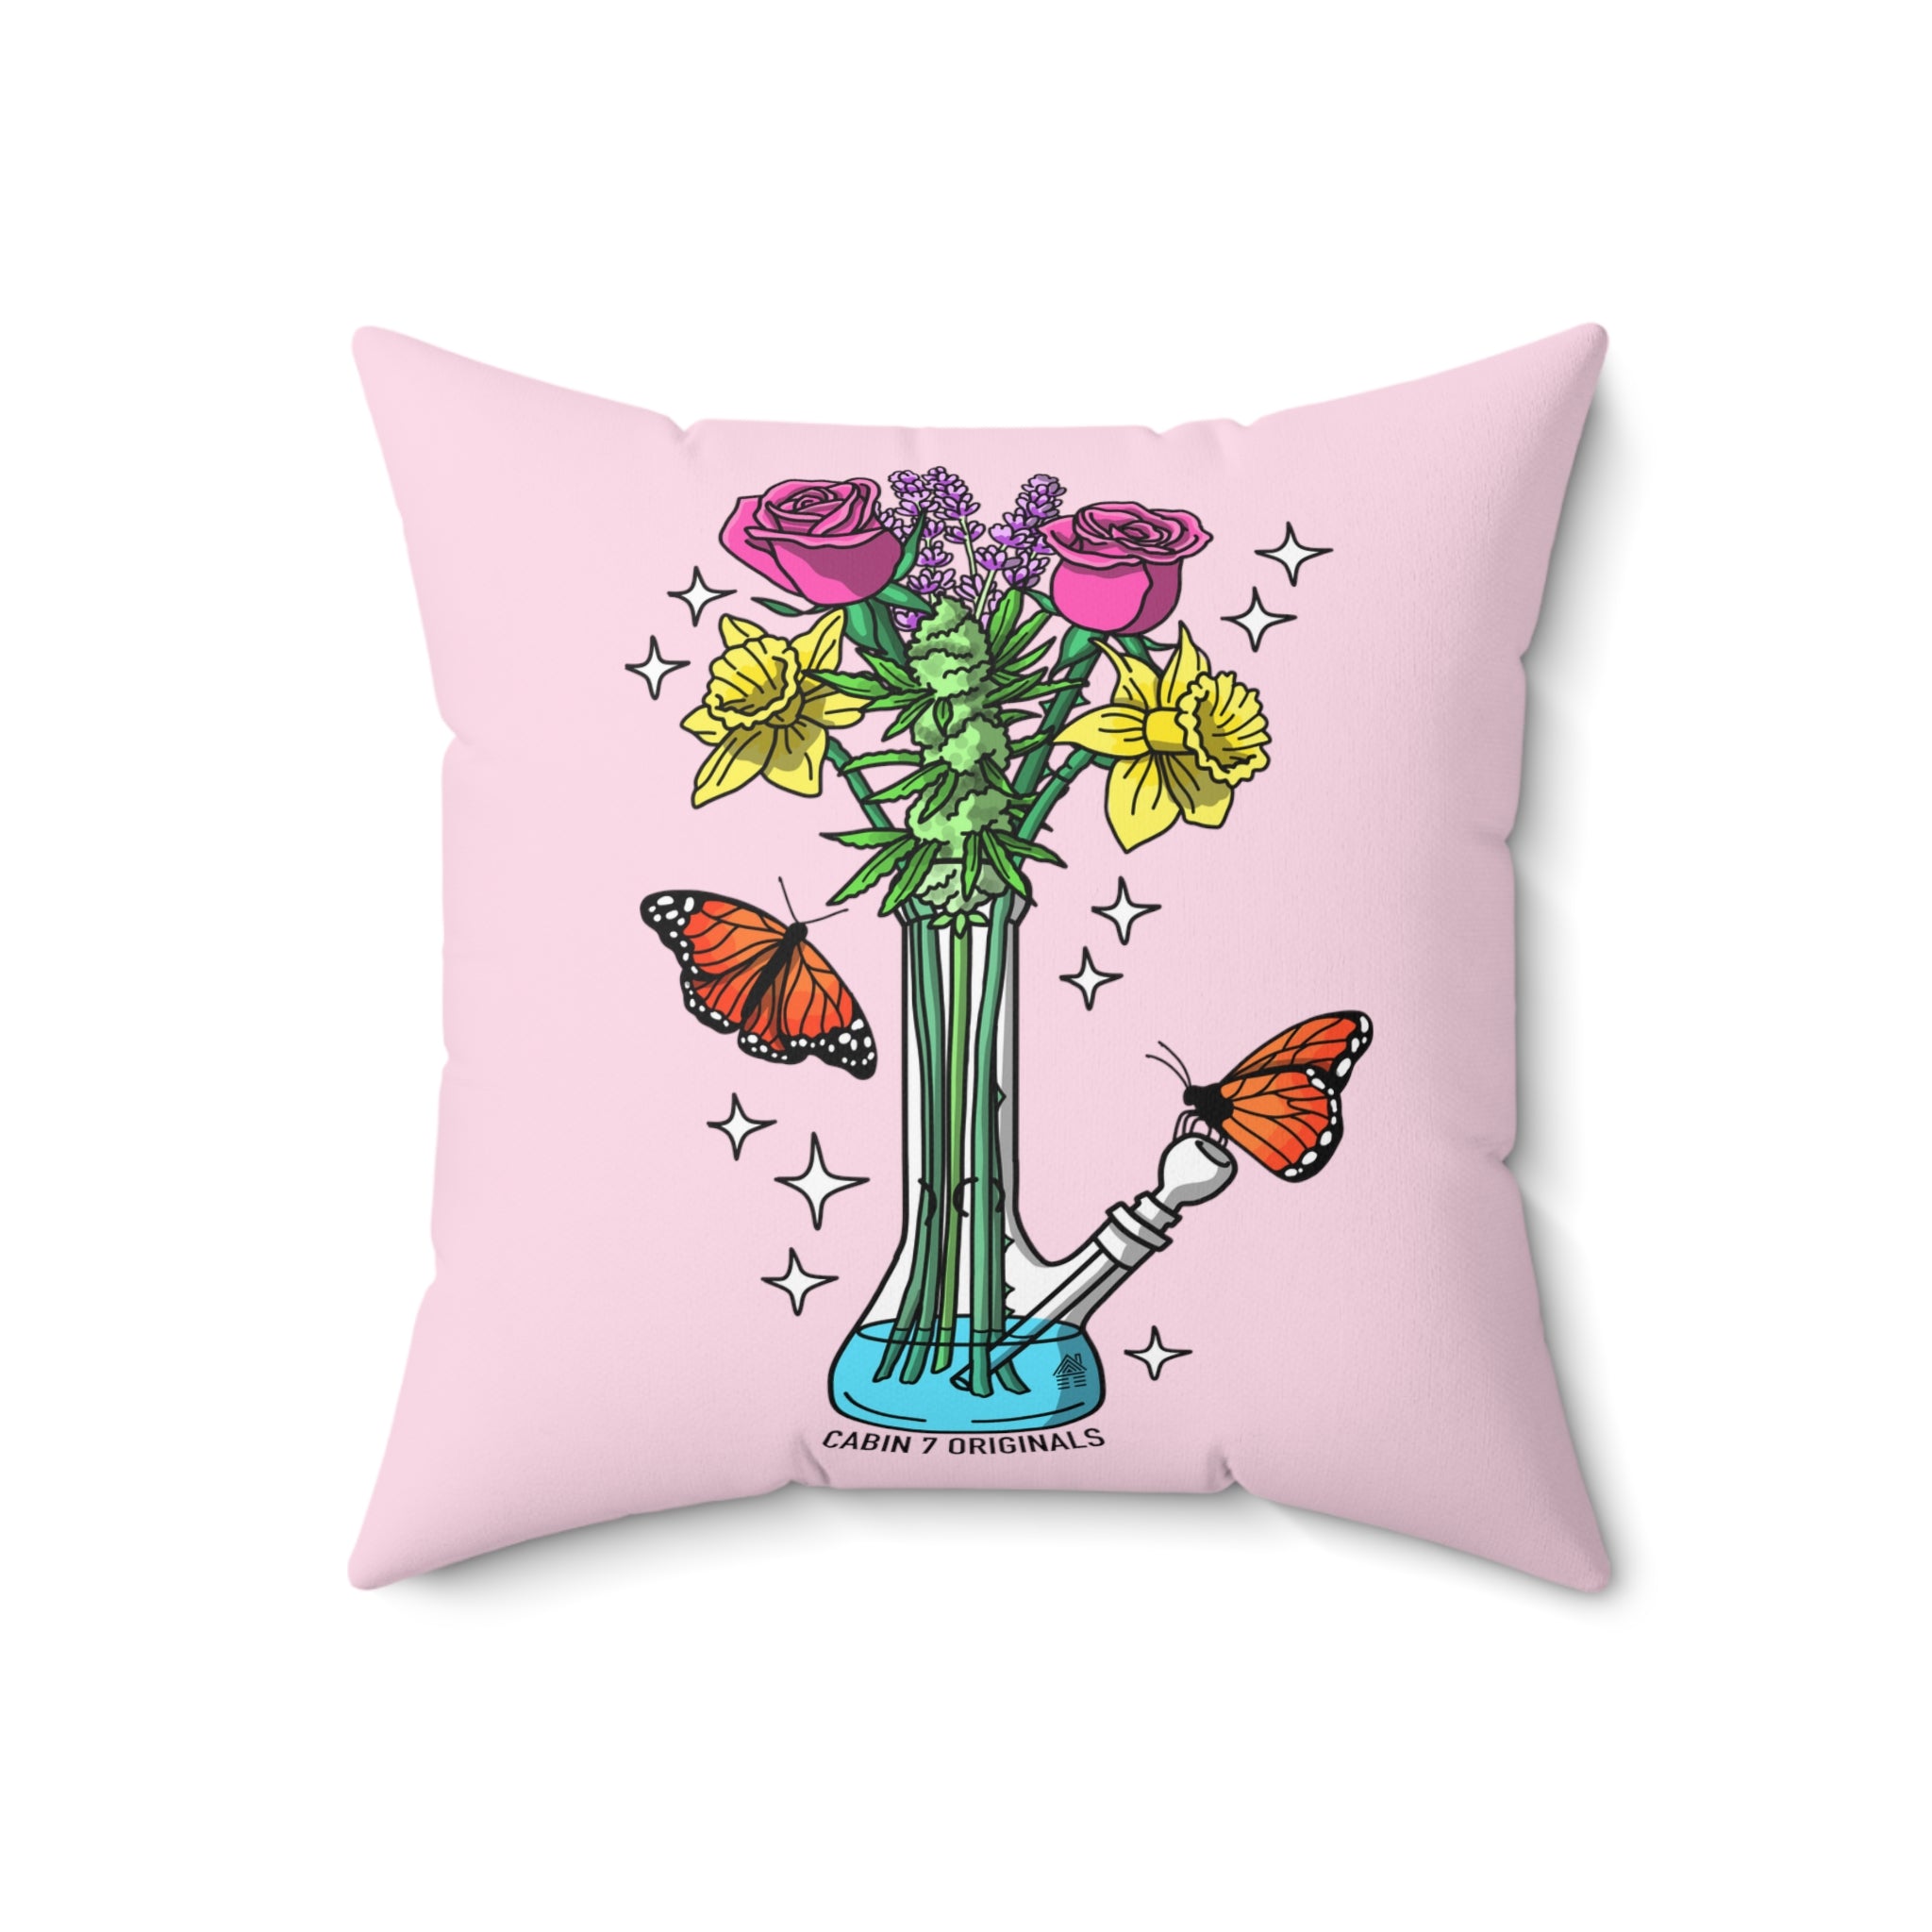 Bring Me Flowers Throw Pillow